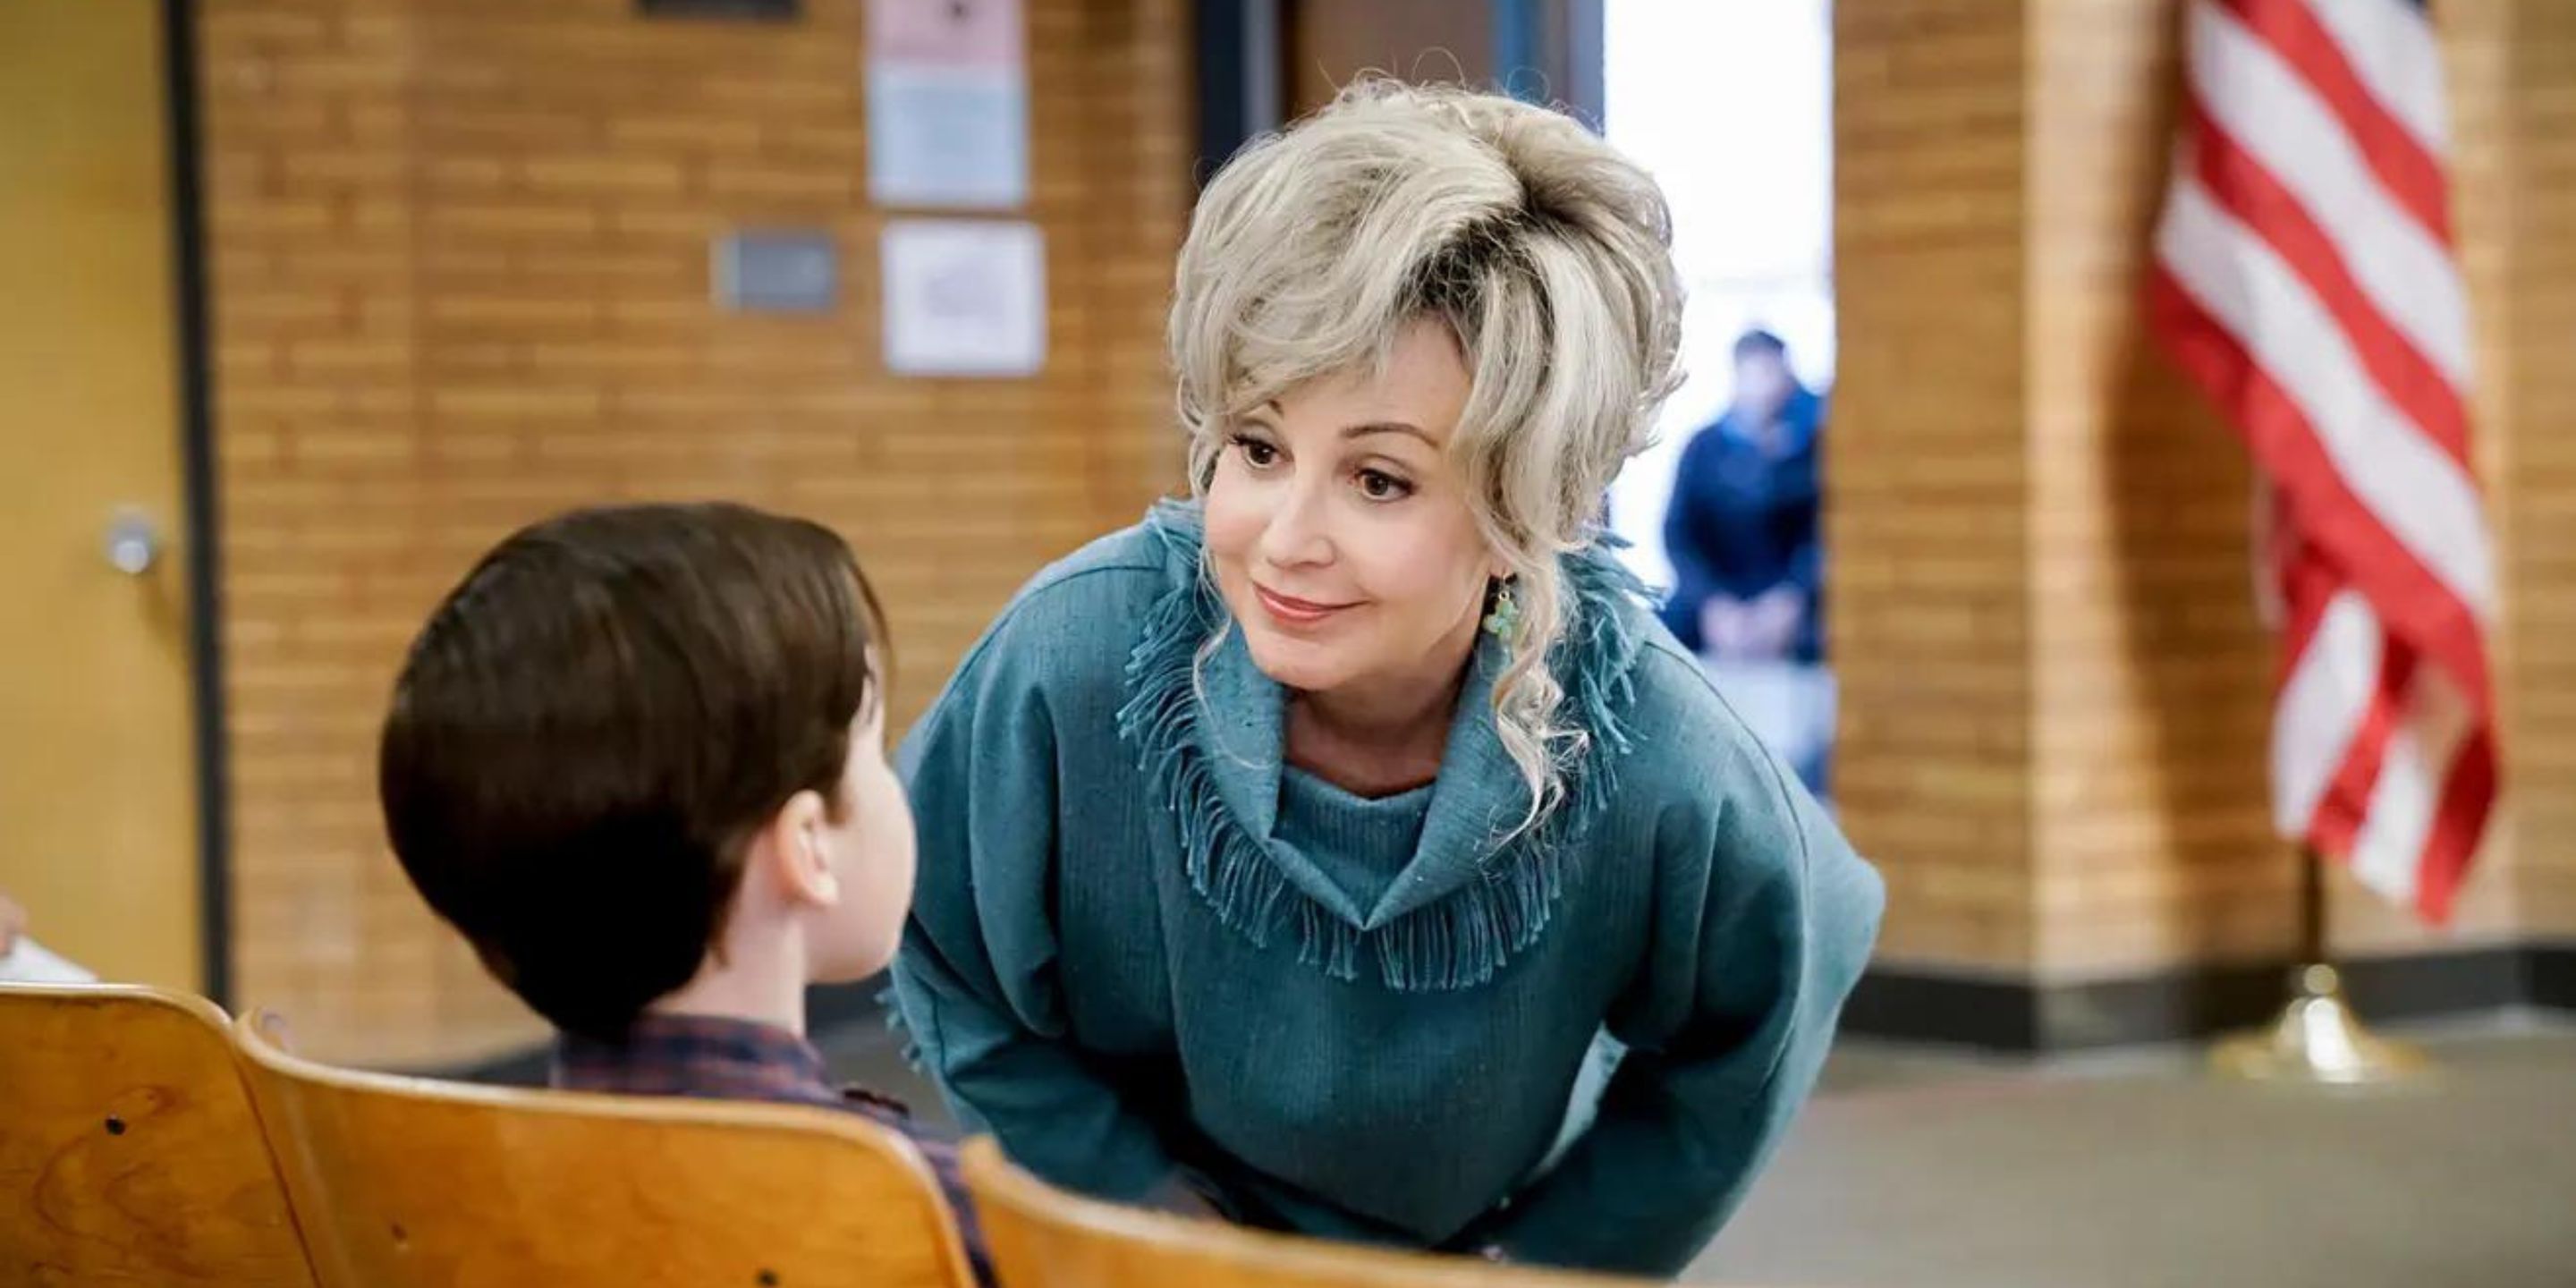 Connie "Meemaw" Tucker, played by Annie Potts, talks to Sheldon Cooper in Young Sheldon